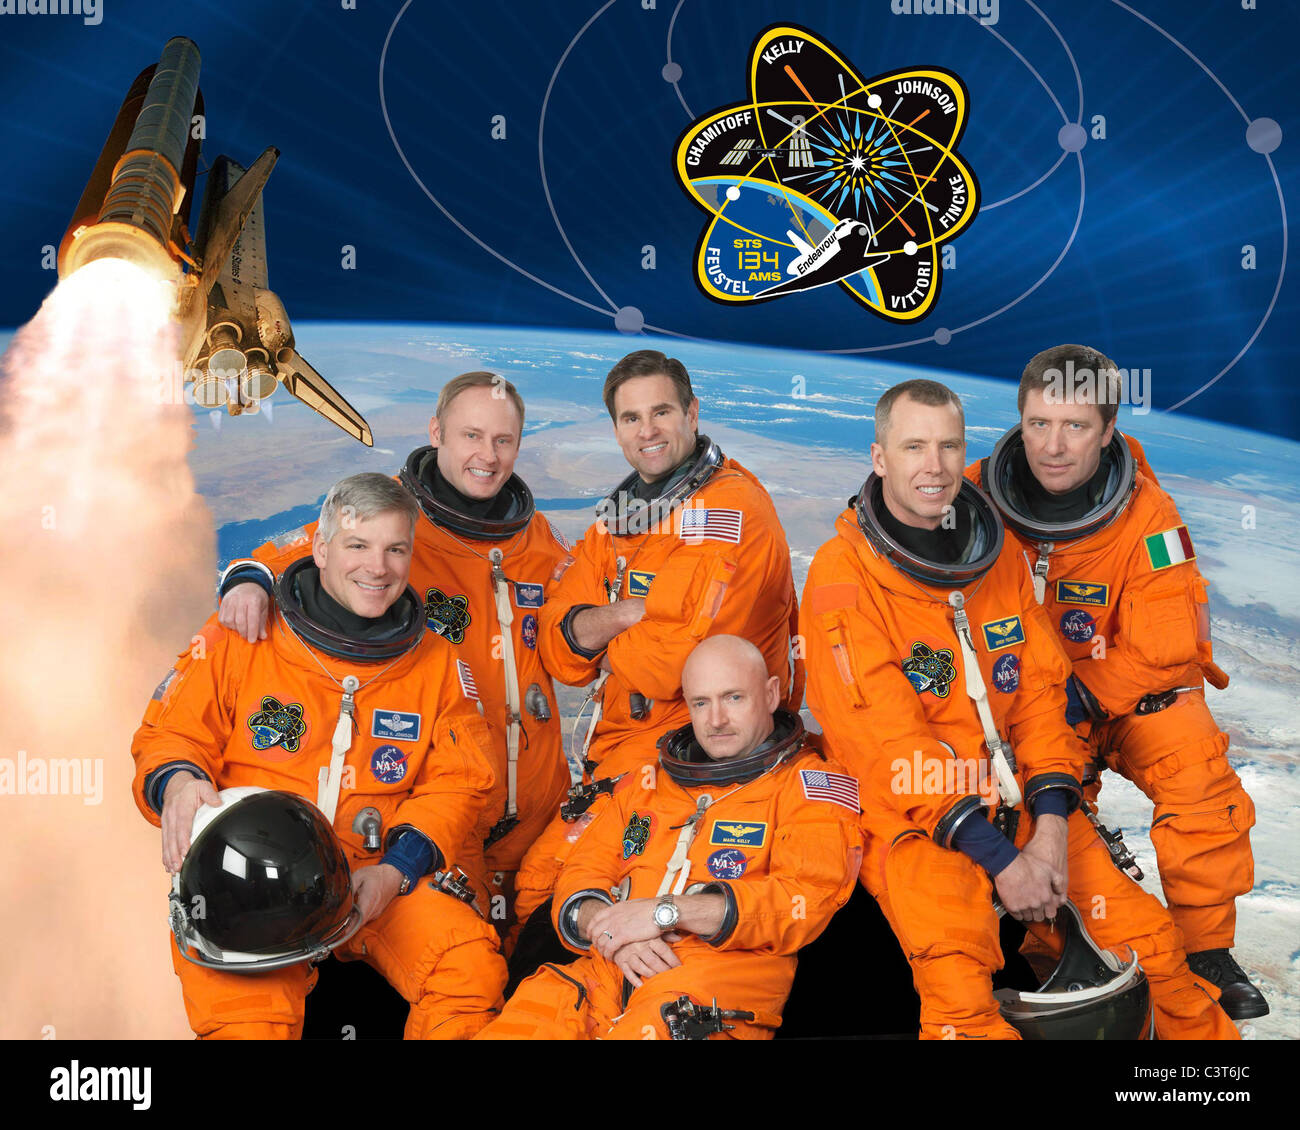 STS-134 Crew Portrait Attired in training versions of their shuttle launch and entry suits, the STS-134 astronauts (pictured clockwise) are NASA astronauts Mark Kelly (bottom center), commander; Gregory H. Johnson, pilot; Michael Fincke, Greg Chamitoff, Andrew Feustel and European Space Agency's Roberto Vittori, all mission specialists. Image credit: NASA Jan. 15, 2010 Stock Photo